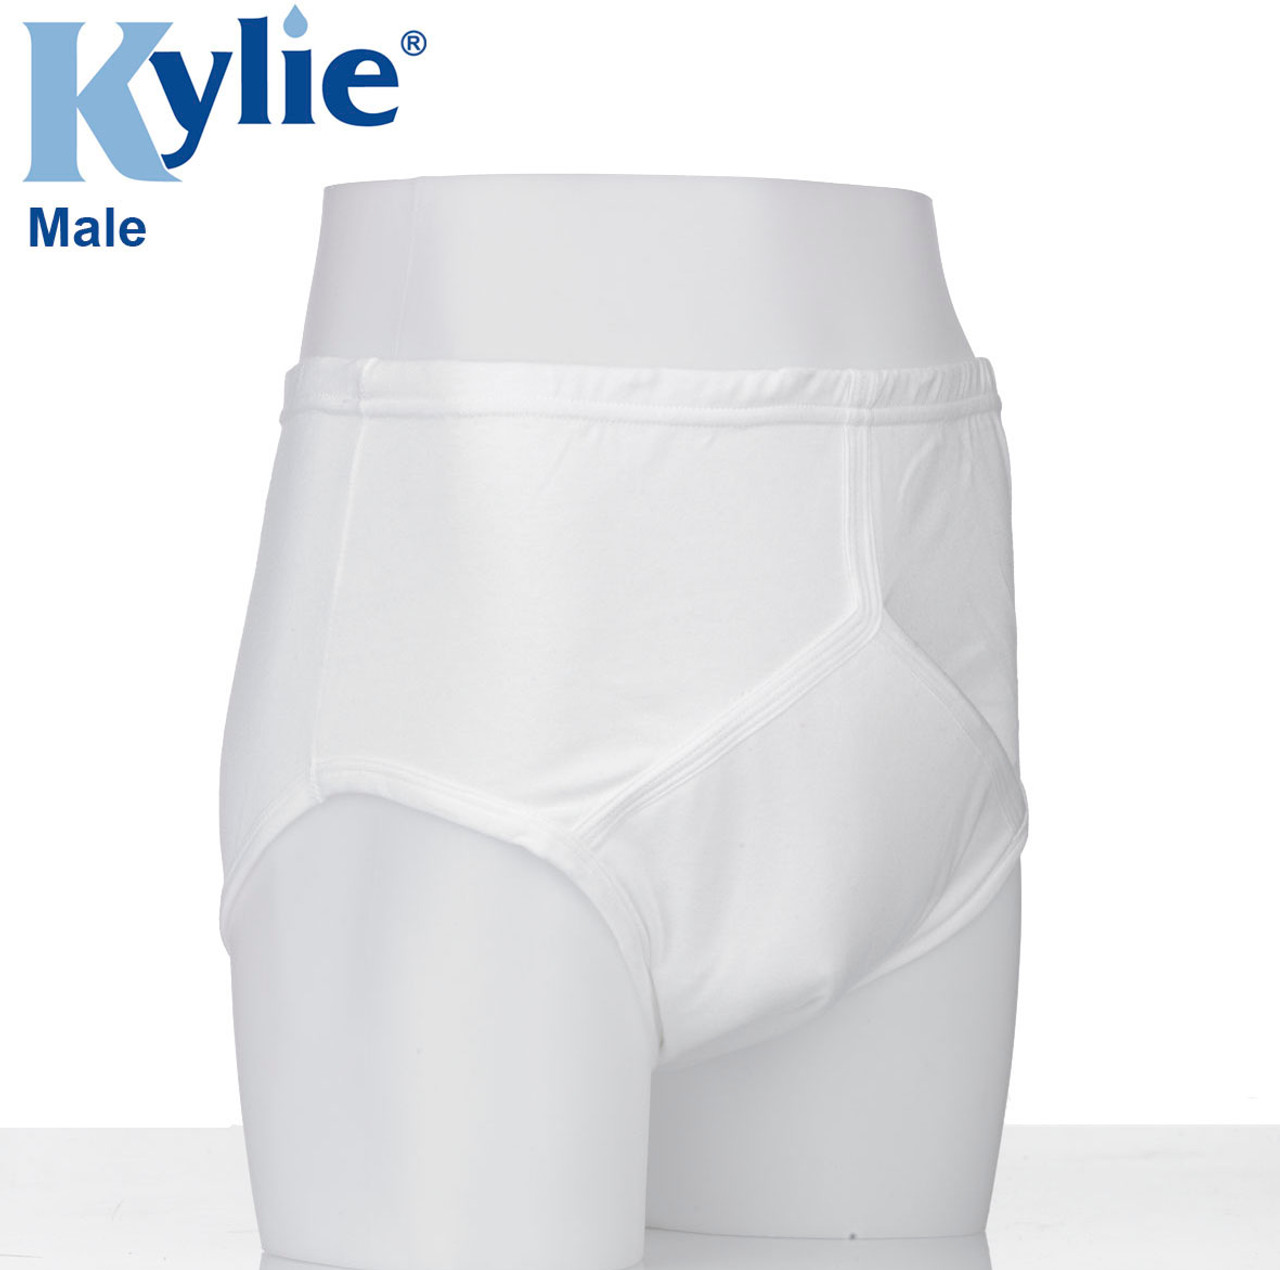 Kylie® Male Incontinence Pants